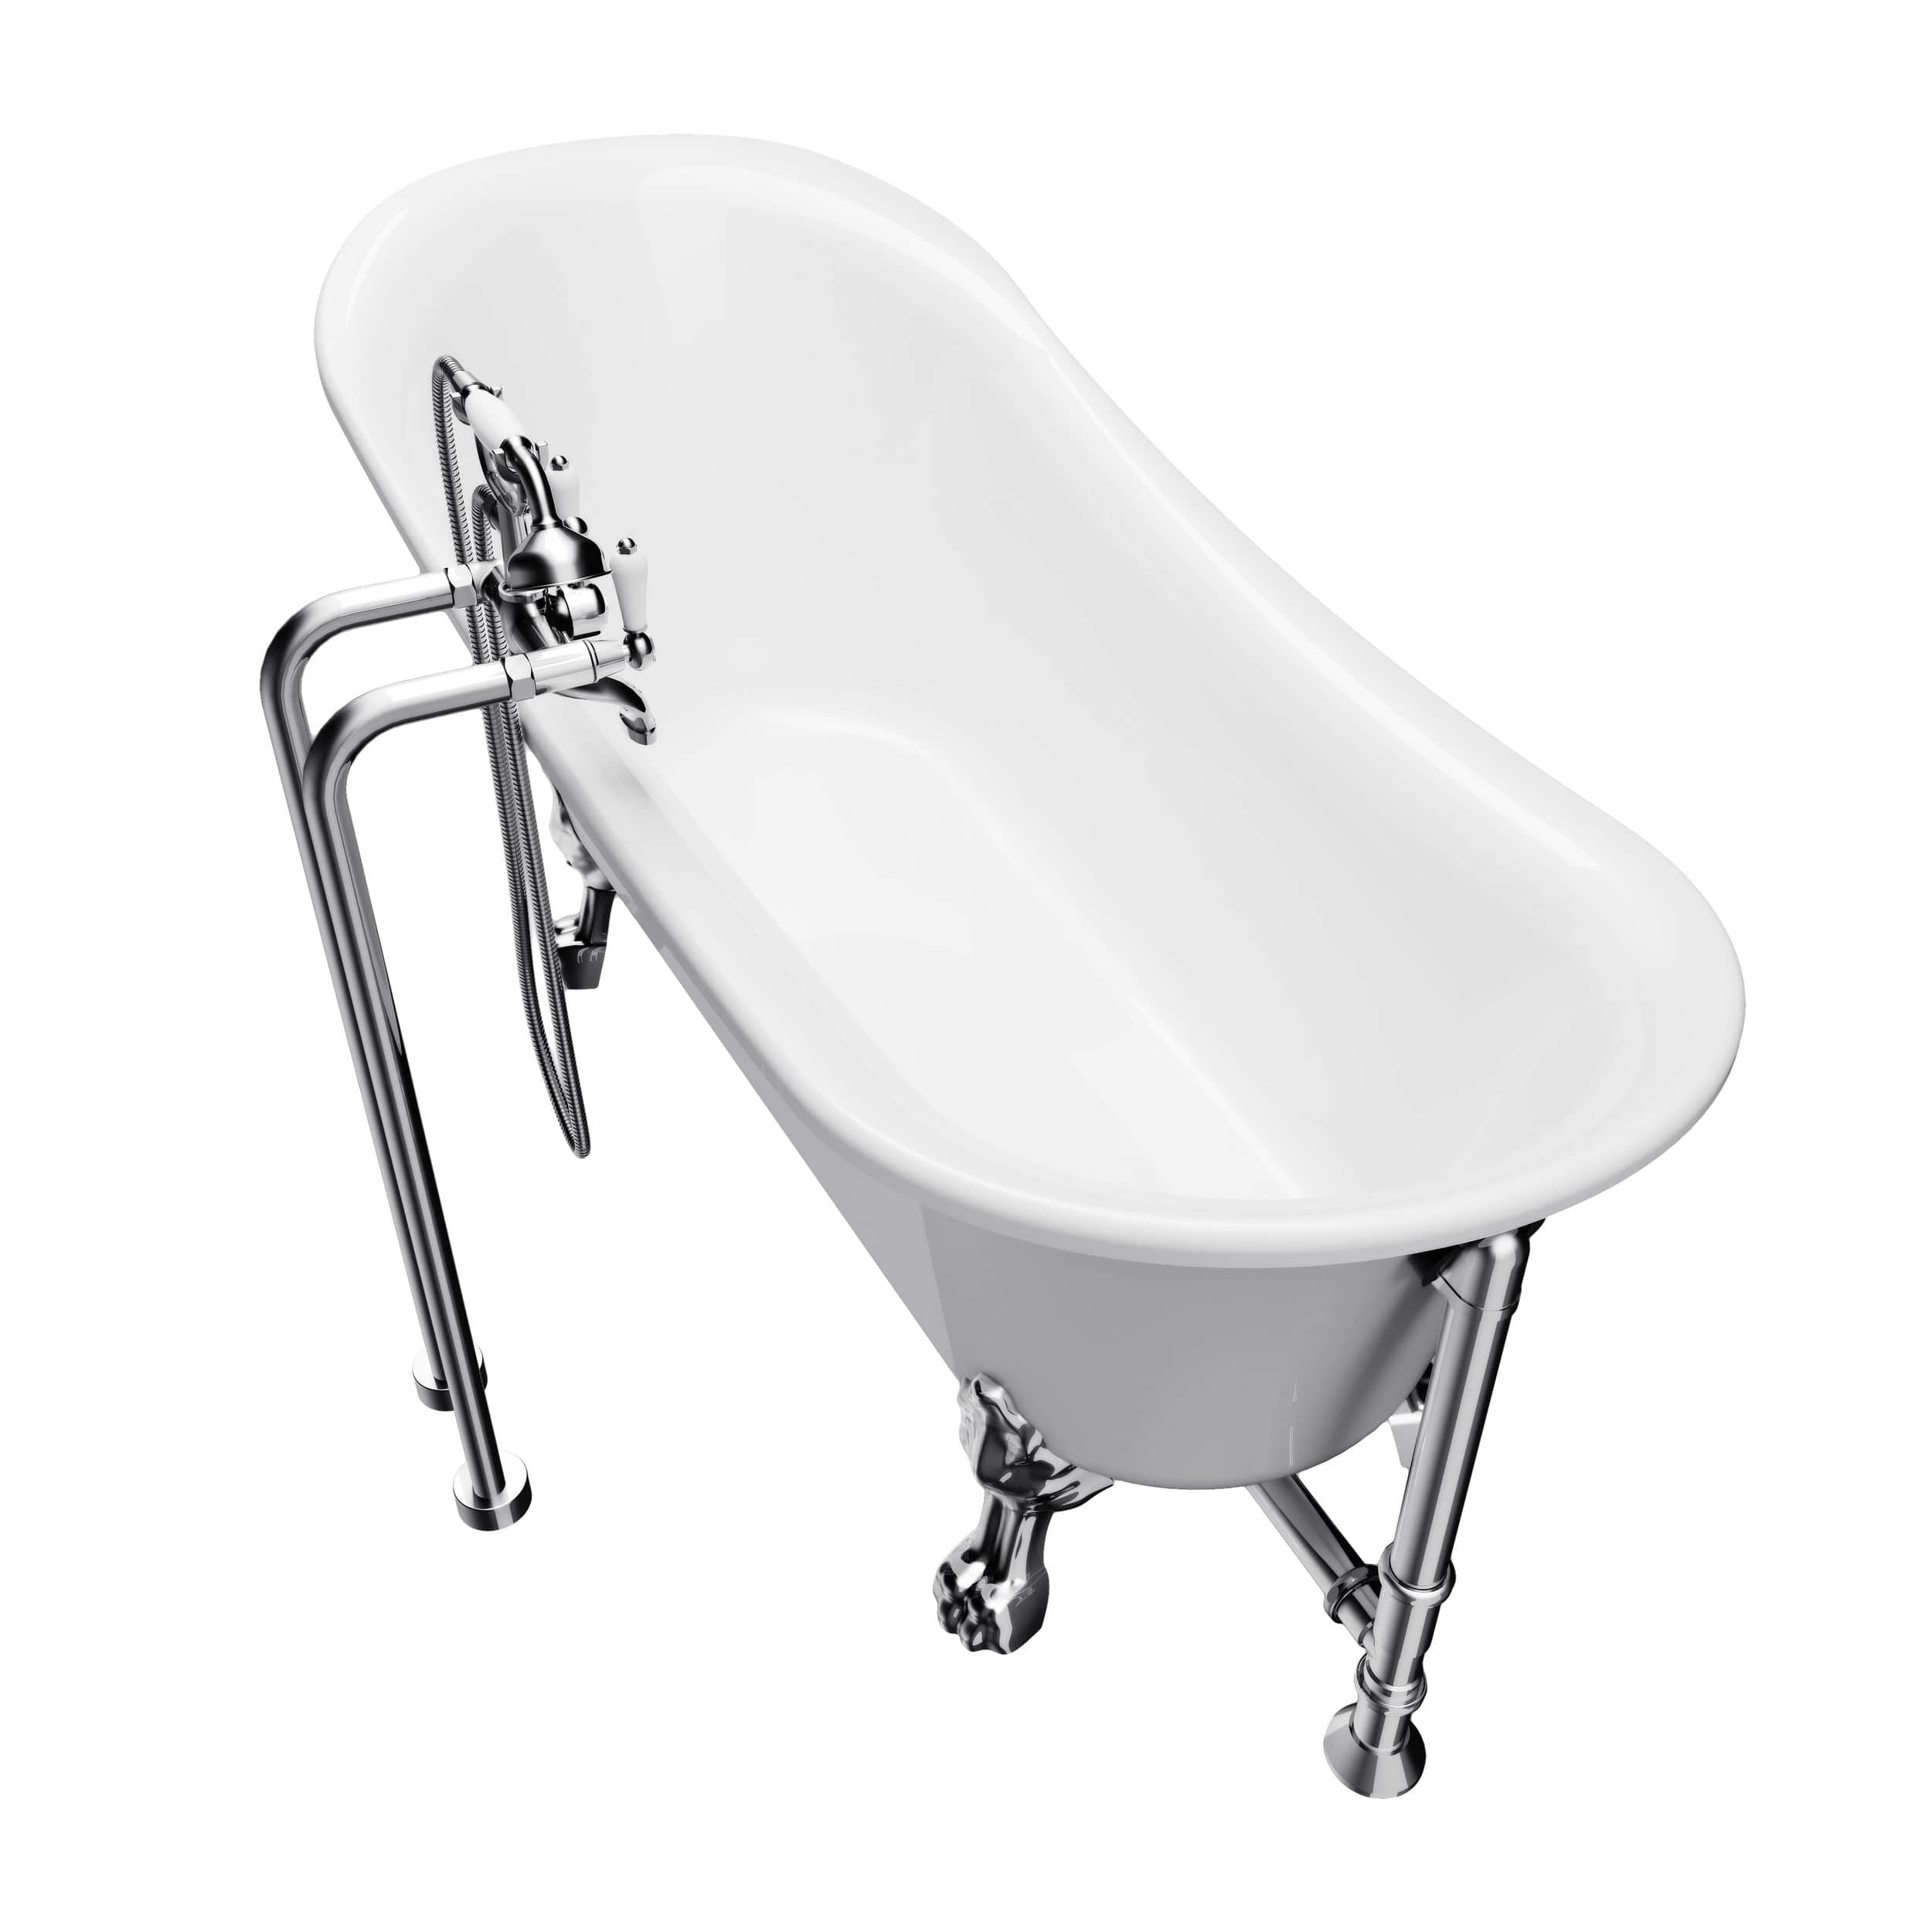 Delphine Acrylic Freestanding Clawfoot Bathtub with Faucet